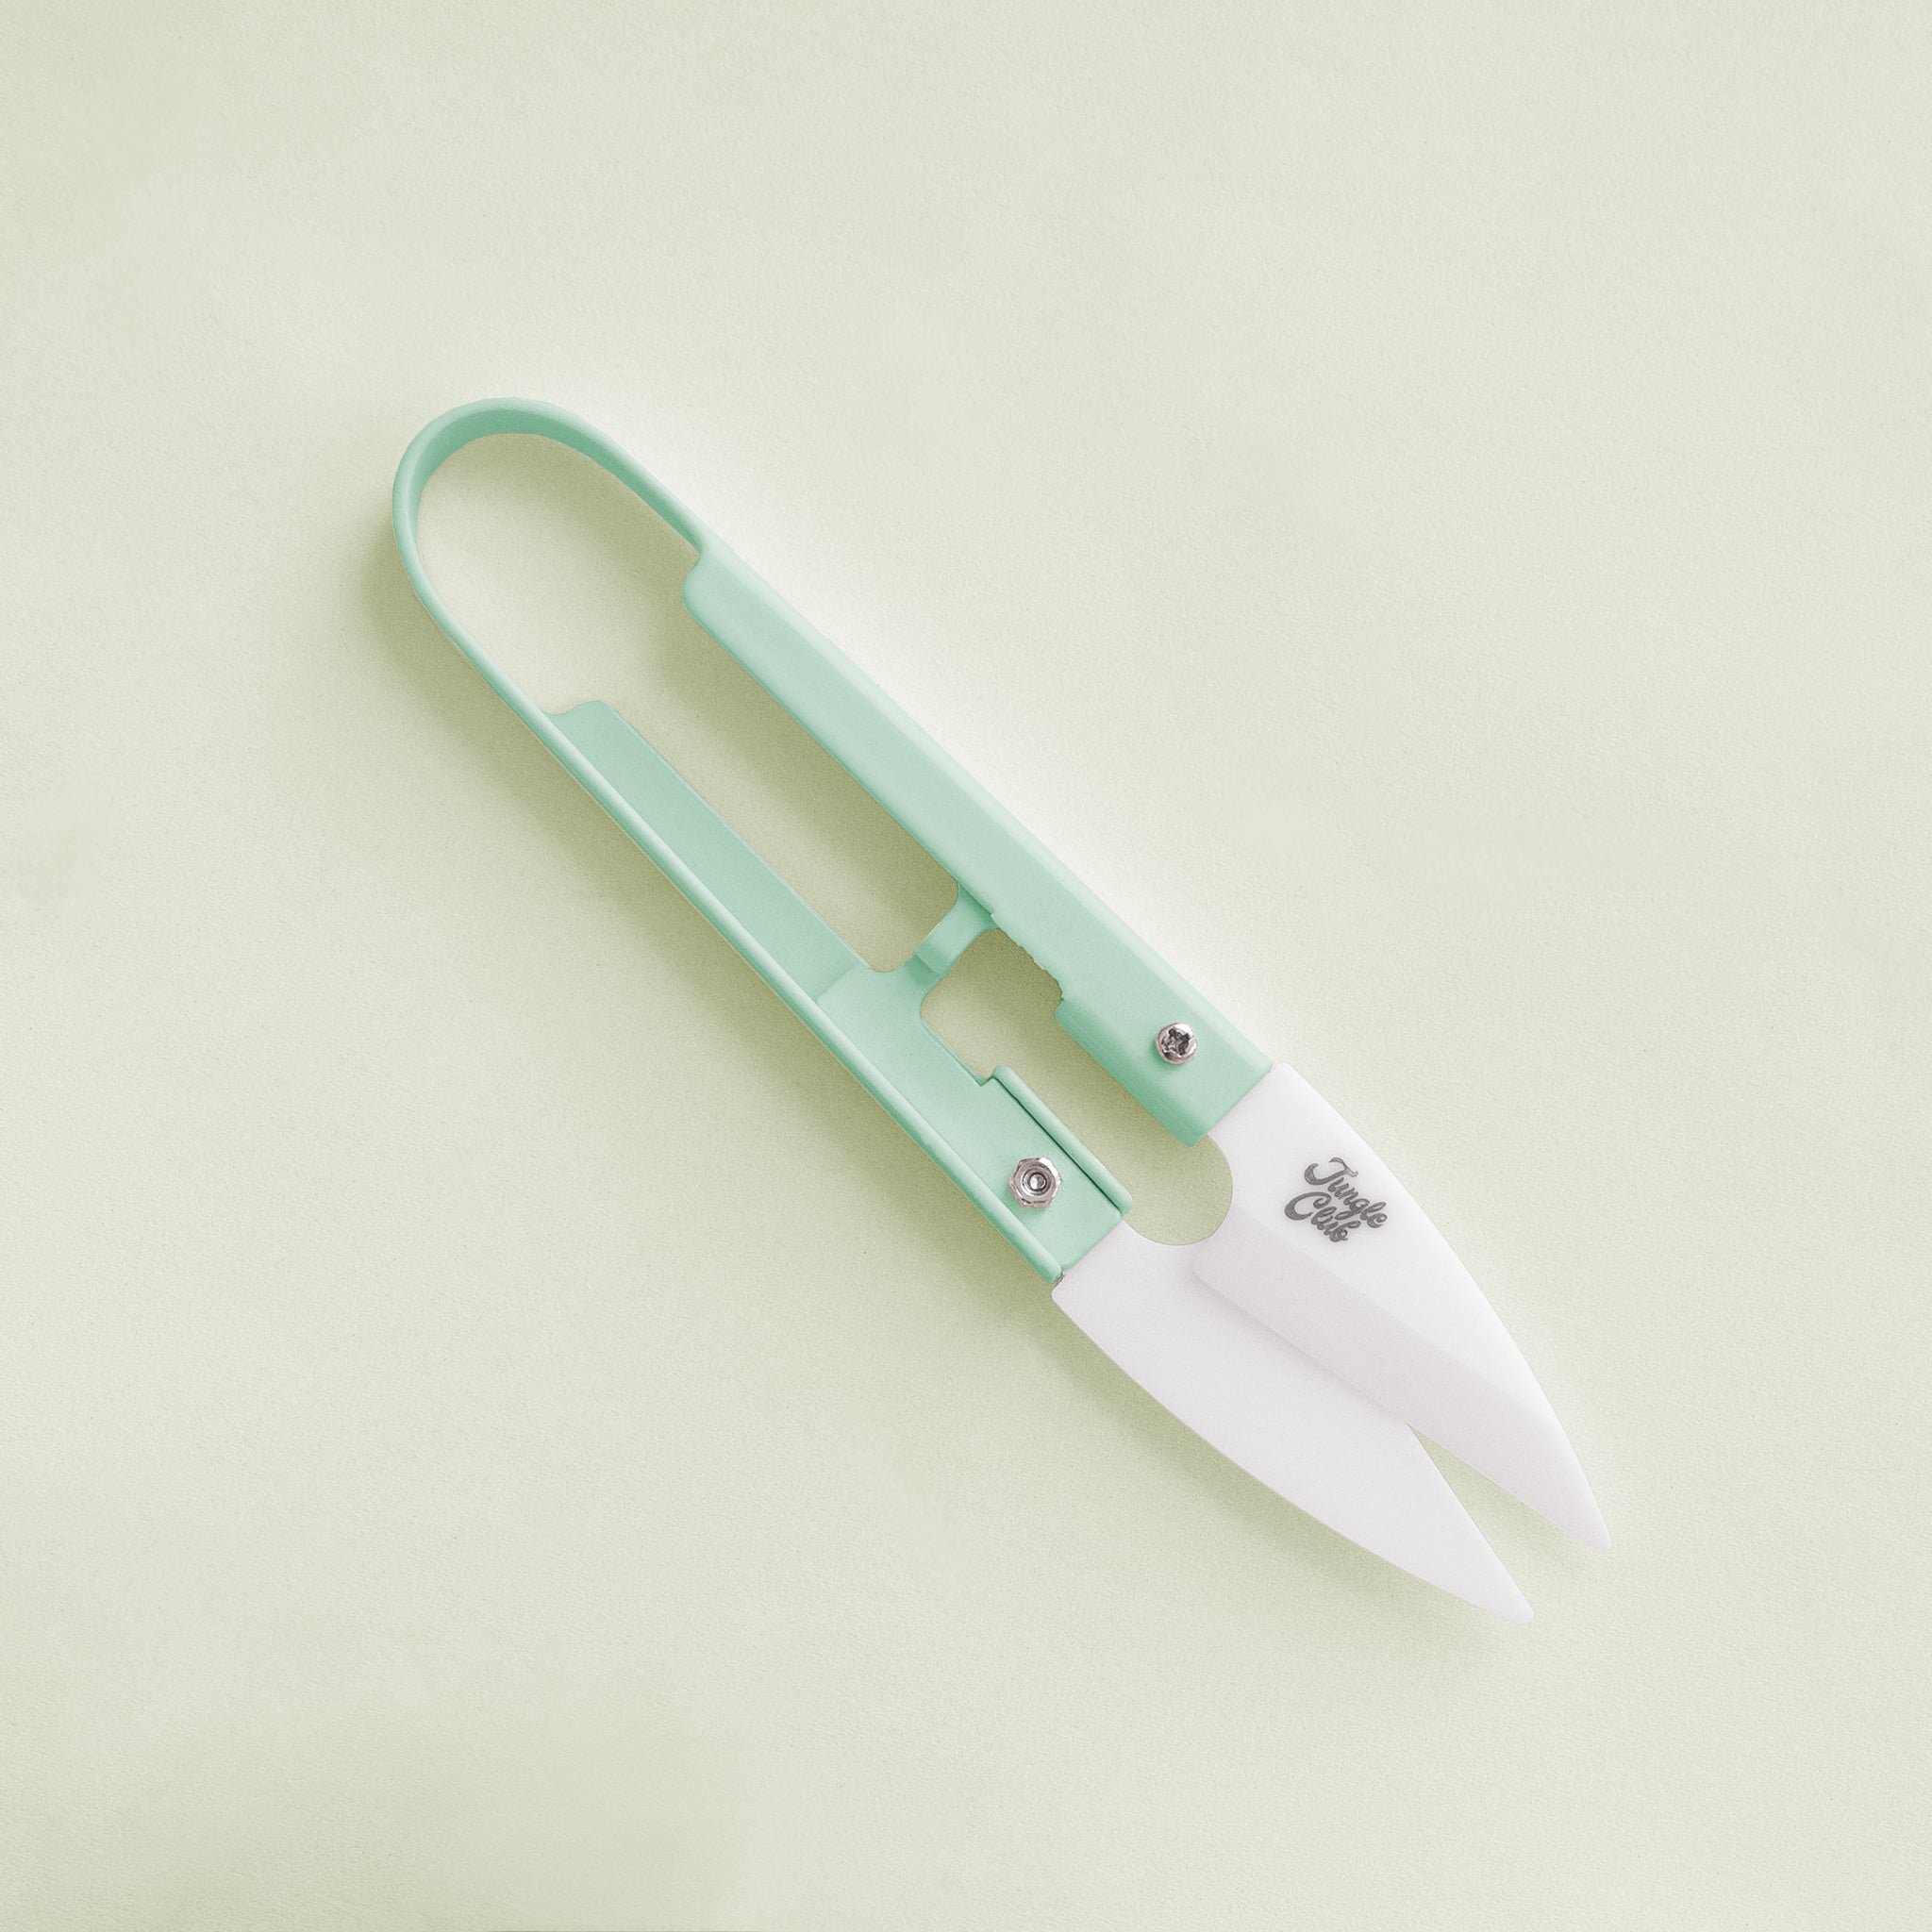 On a light green background is a pair of mint green mini plant shears with small text on the clippers that reads, "Jungle Club".